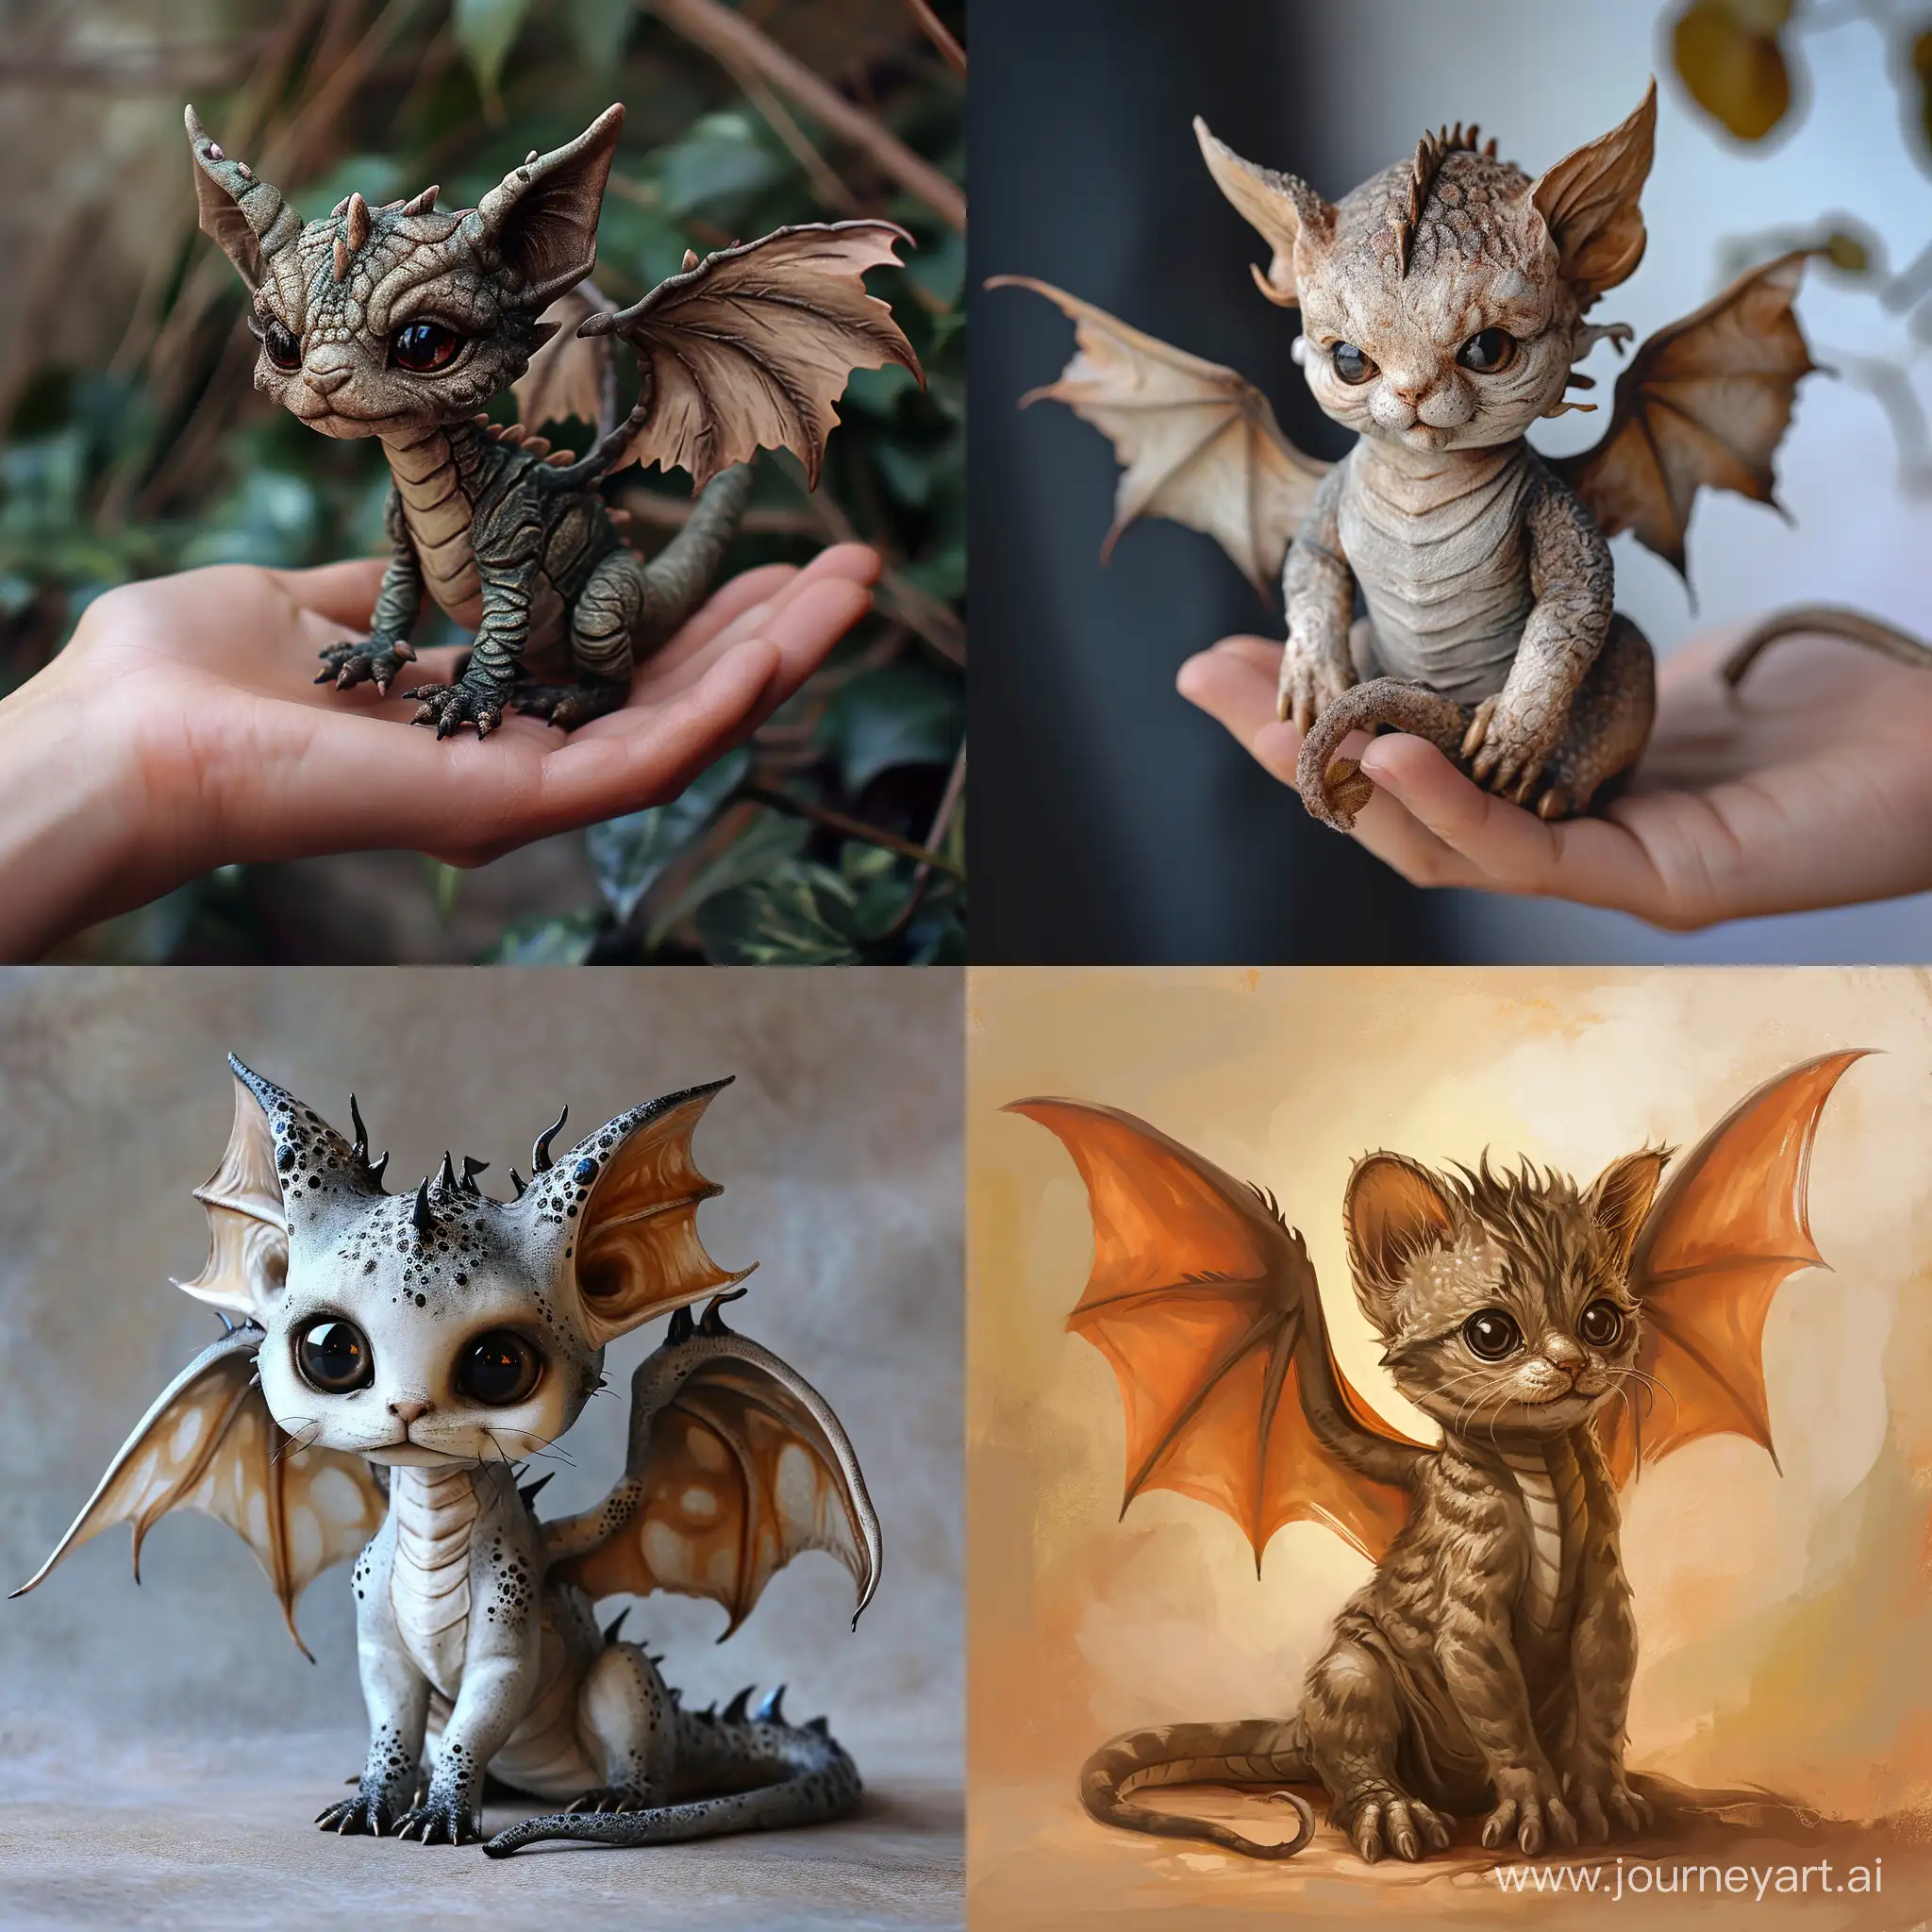 Adorable-Winged-Dragon-with-KittenLike-Face